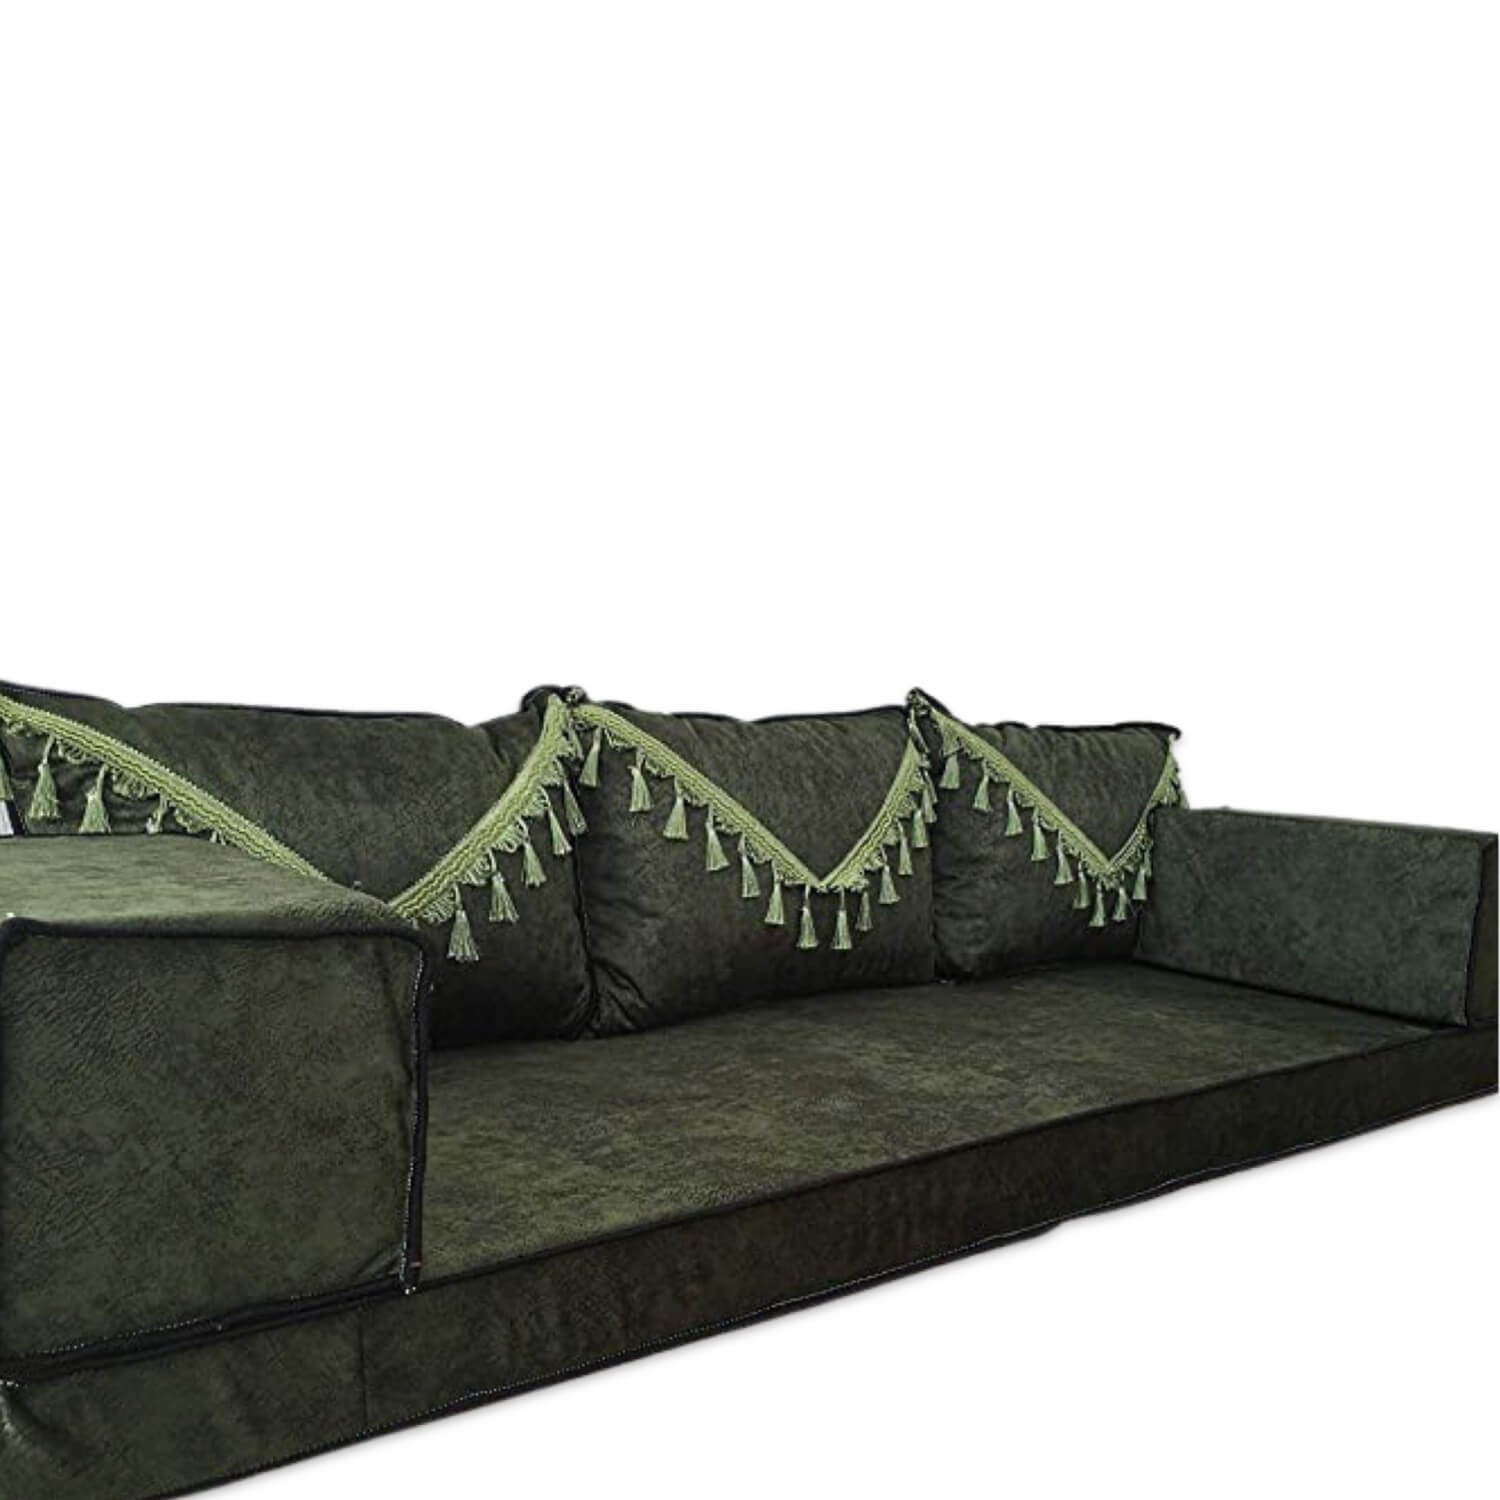 Green fabric floor sofa couch, Large floor pillows